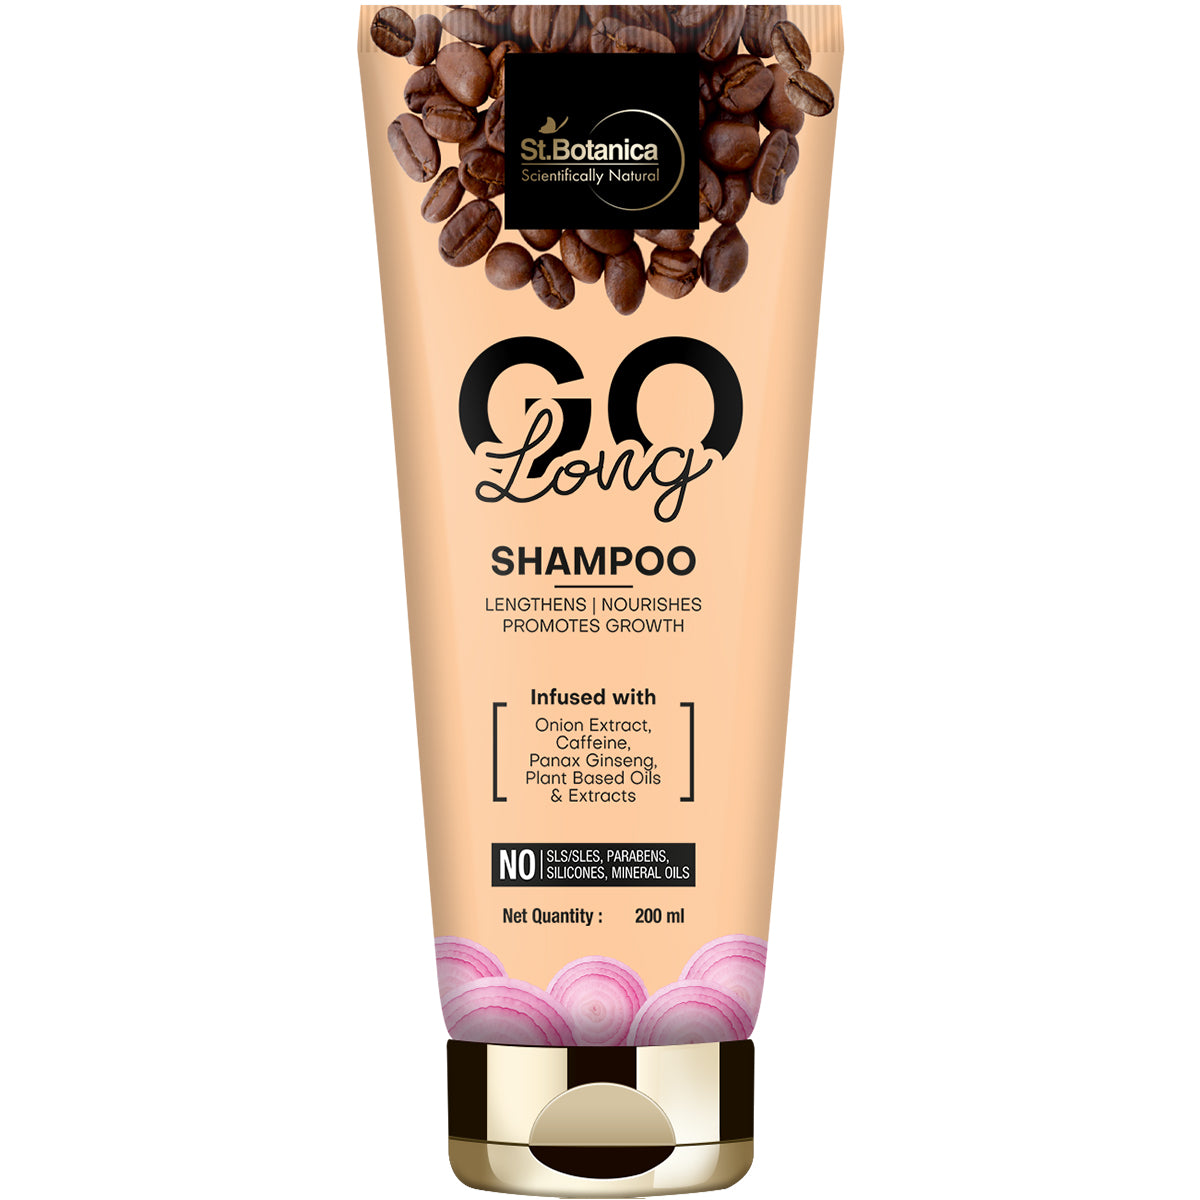 St.Botanica GO Long Onion Hair Shampoo - With Onion Oil, Caffeine, Panax Ginseng, No SLS/Sulphate, Paraben, Silicones, Colors, 200ml